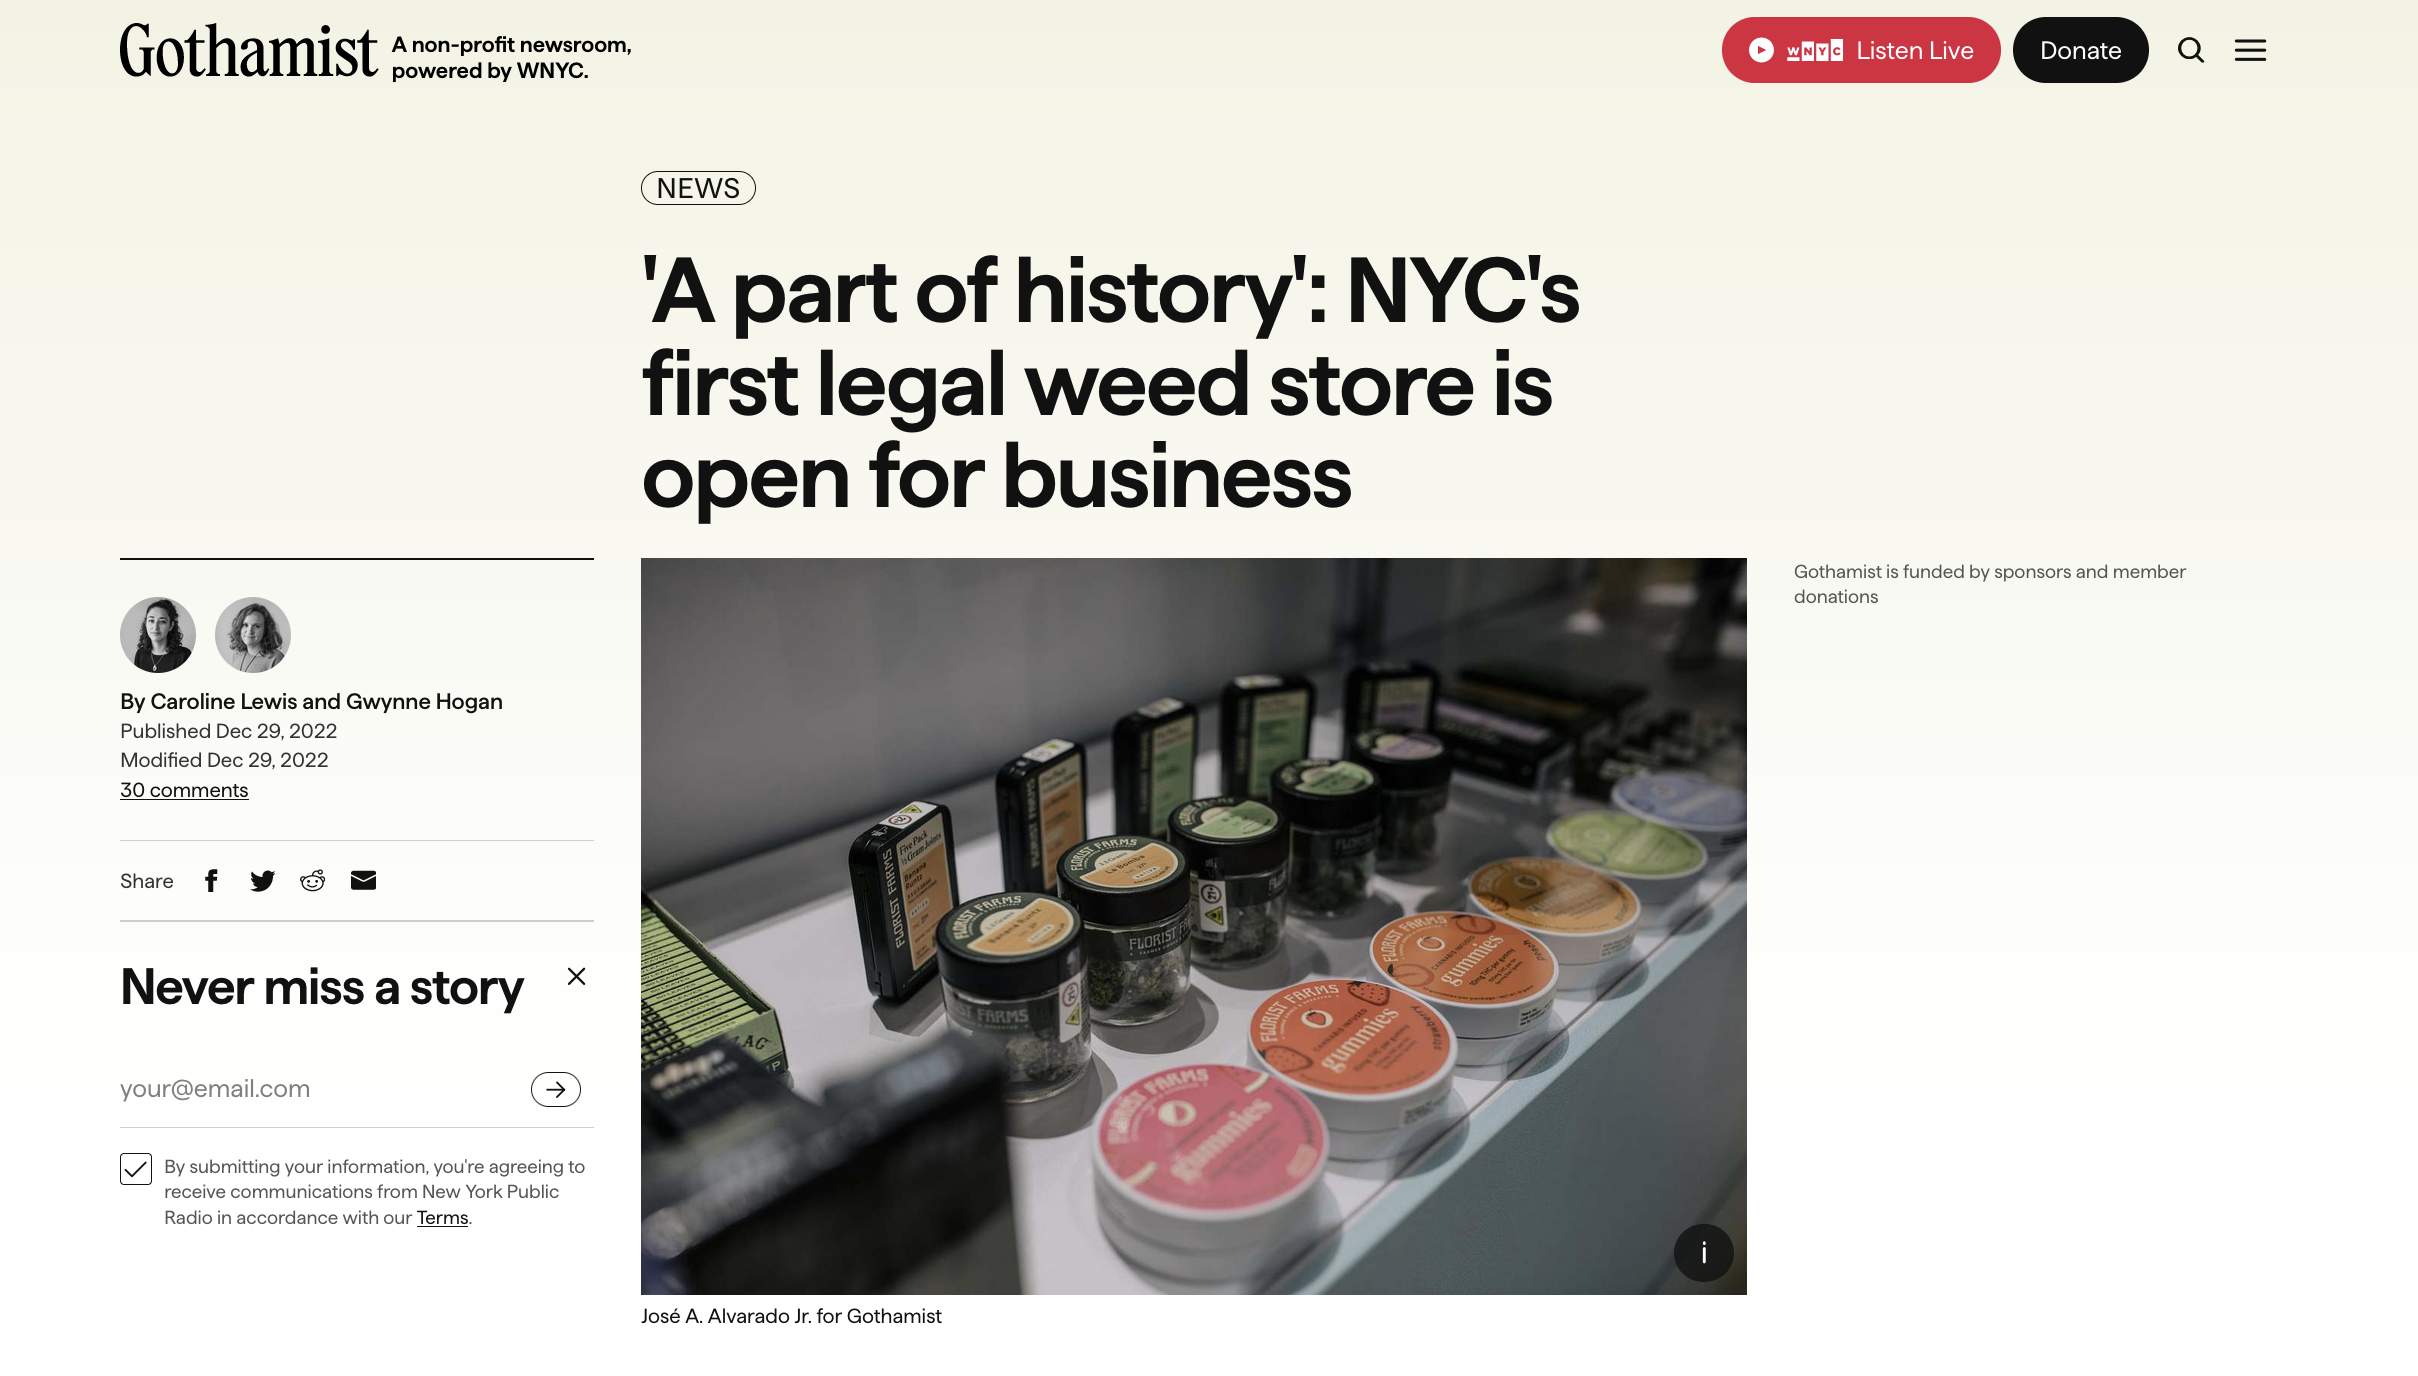 for Gothamist: 'A part of history': NYC's first legal weed store is open for business